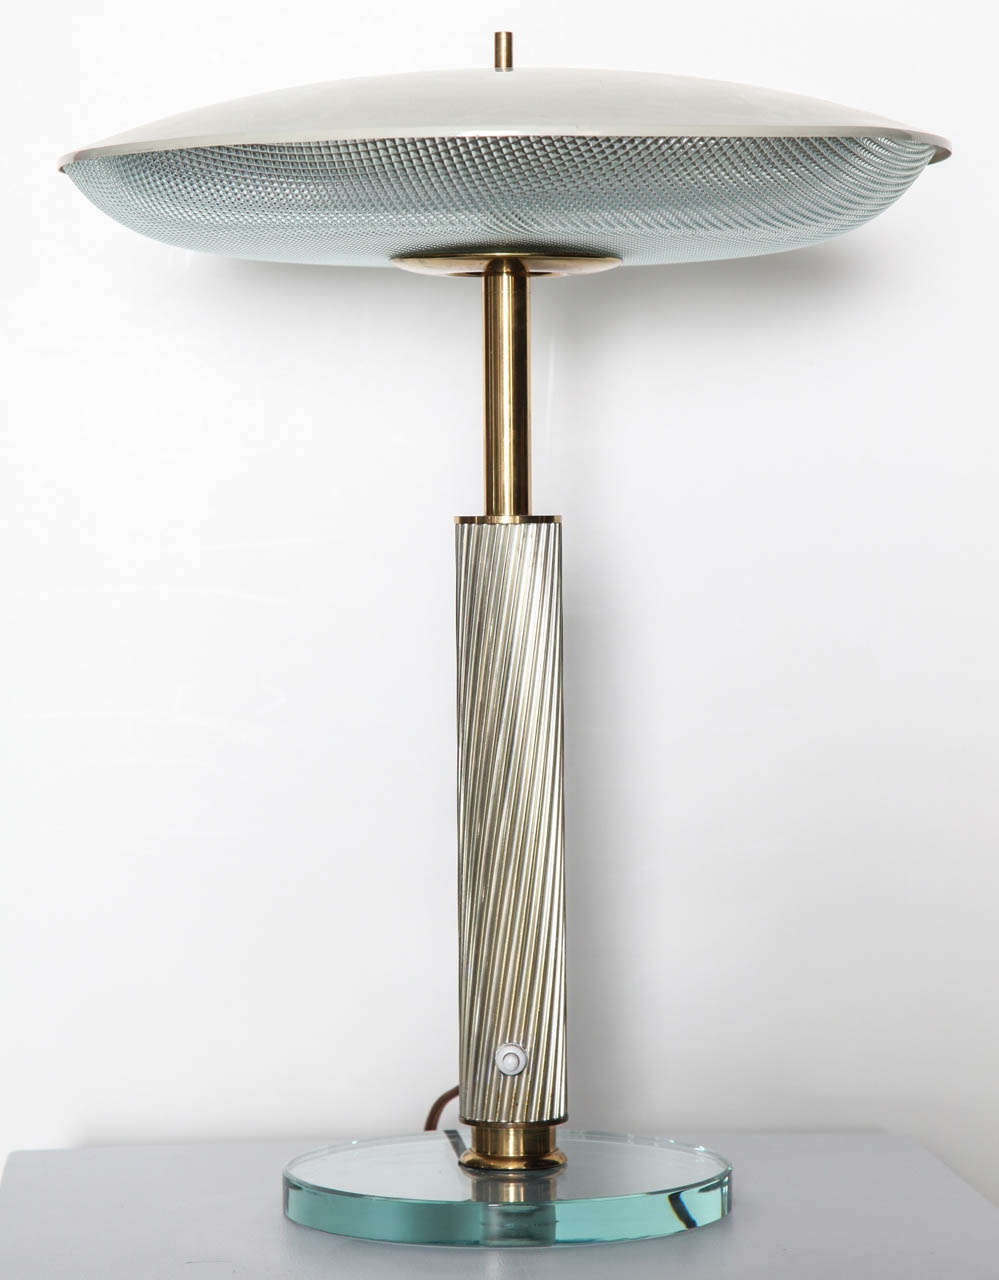 Textured and smooth glass elements.  Enameled aluminum, textured metal, and polished brass.  Pivoting shade with 3 candelabra sockets.  A very rare form in great condition.